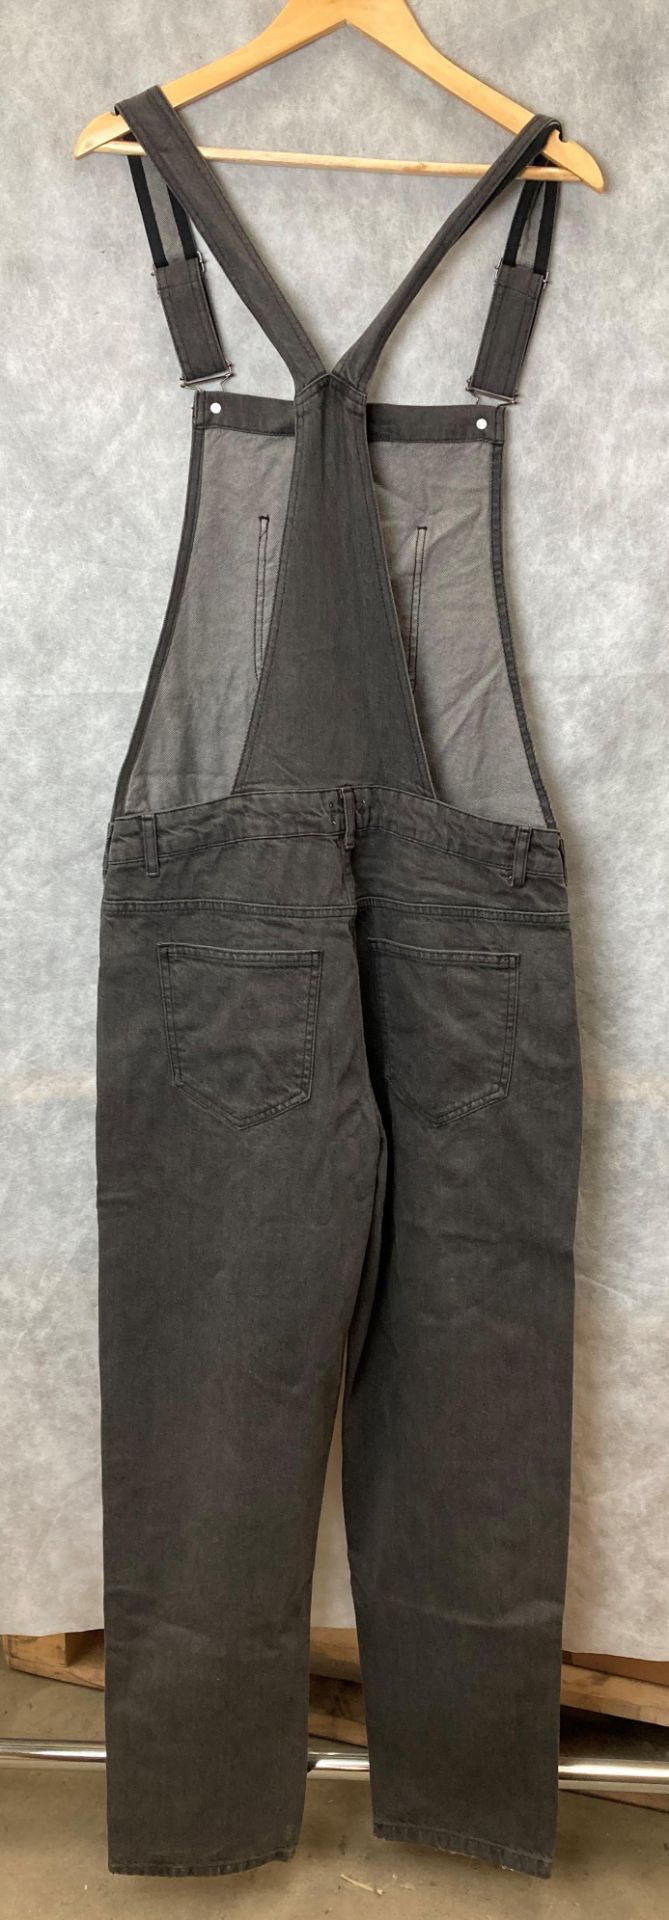 Boohoo Man relaxed fit long dungaree in charcoal size 34/36 (possibly new) (AA02) - Image 2 of 2